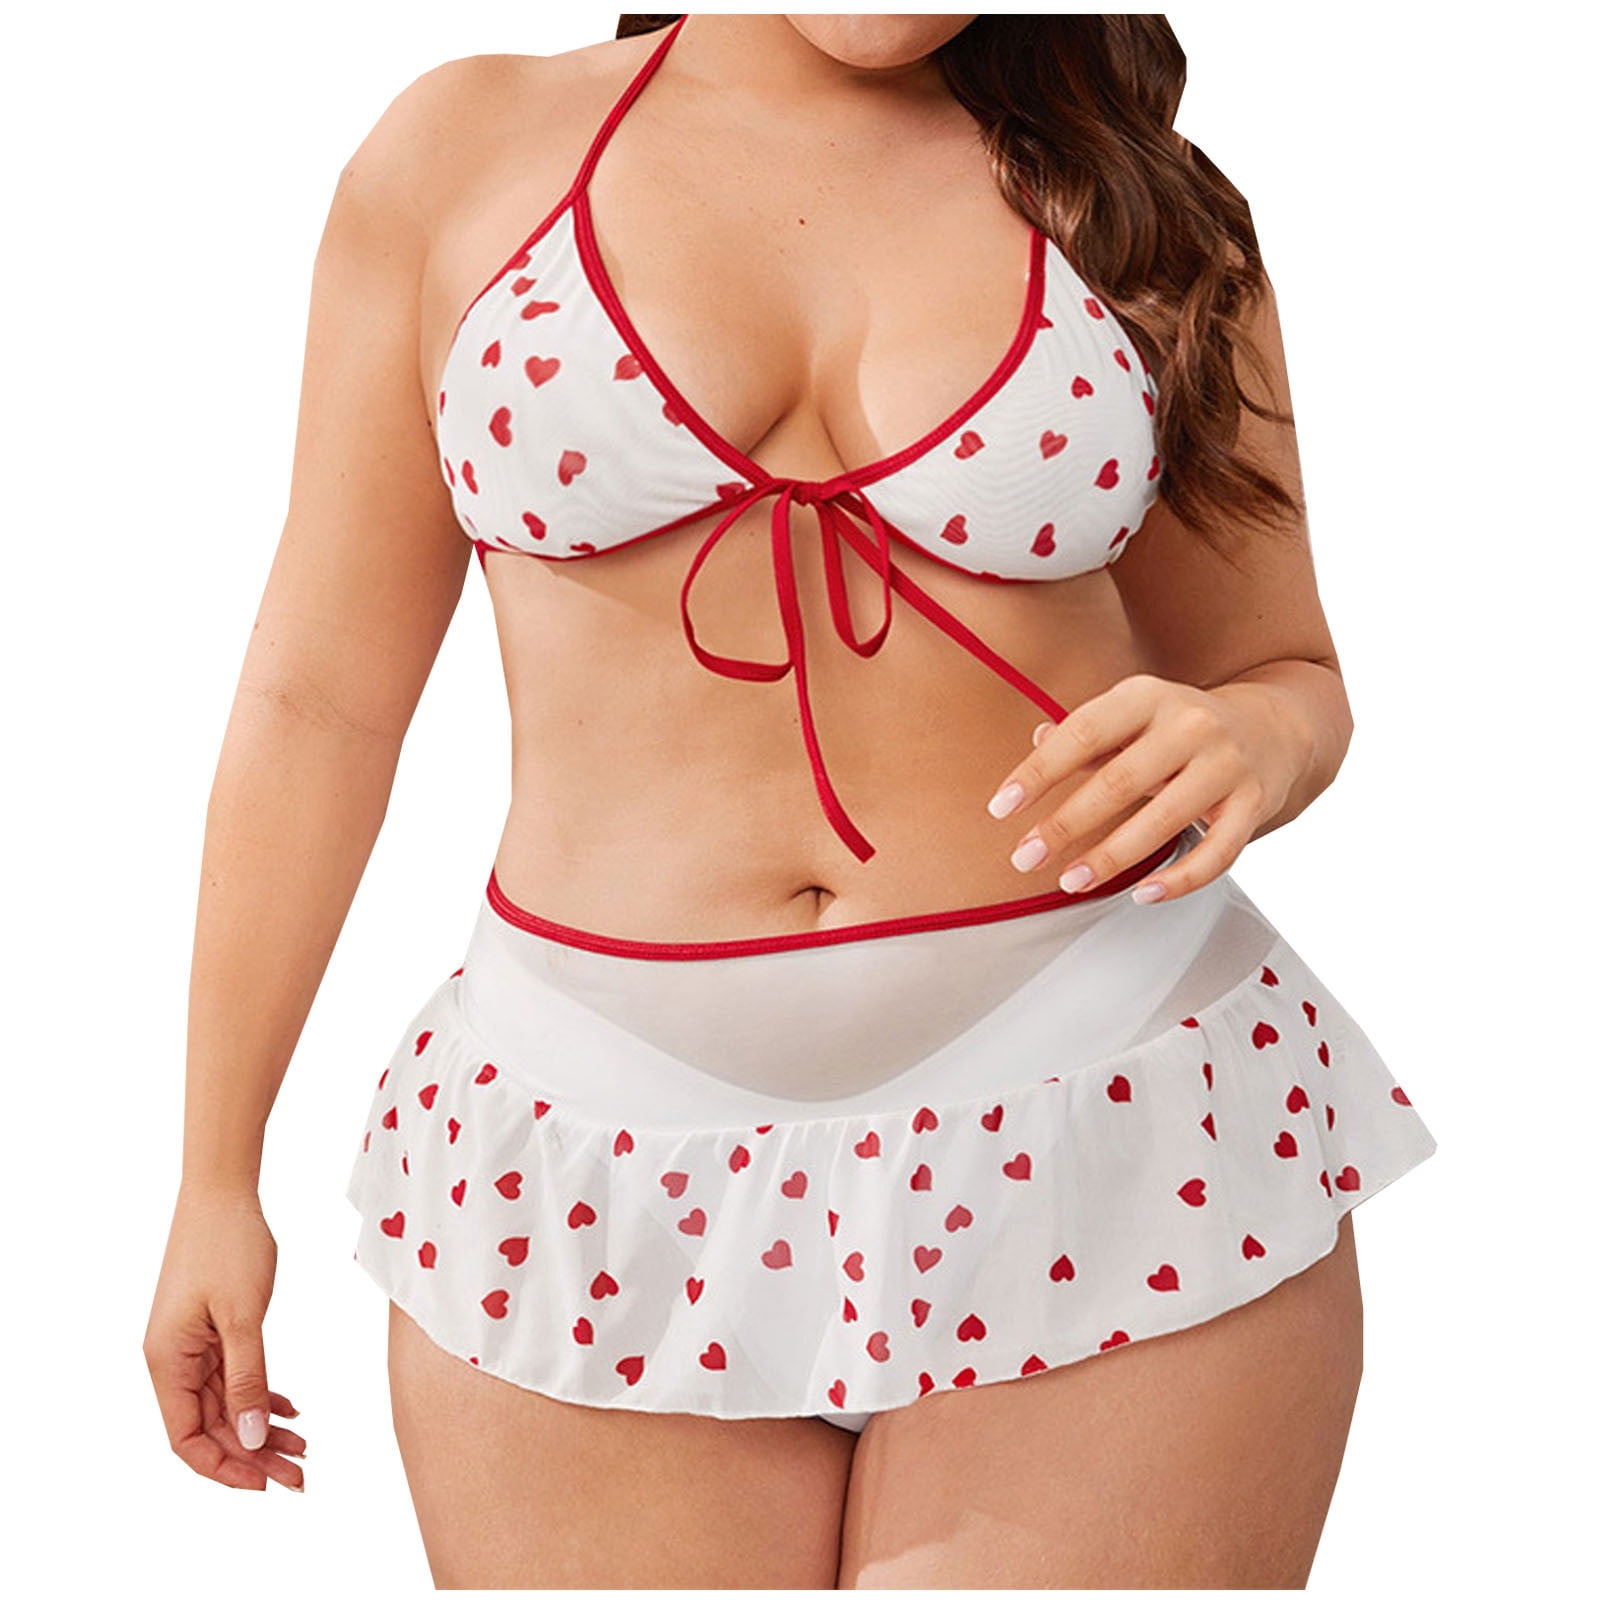 Lencería Mujer Sexy Monos Babydol Bridal Lingerie Bra And Panty Set Lace Boudoir Outfits V Halter Free Size Thong Panty Liners Lace Bra Panty Push Up - Walmart.com